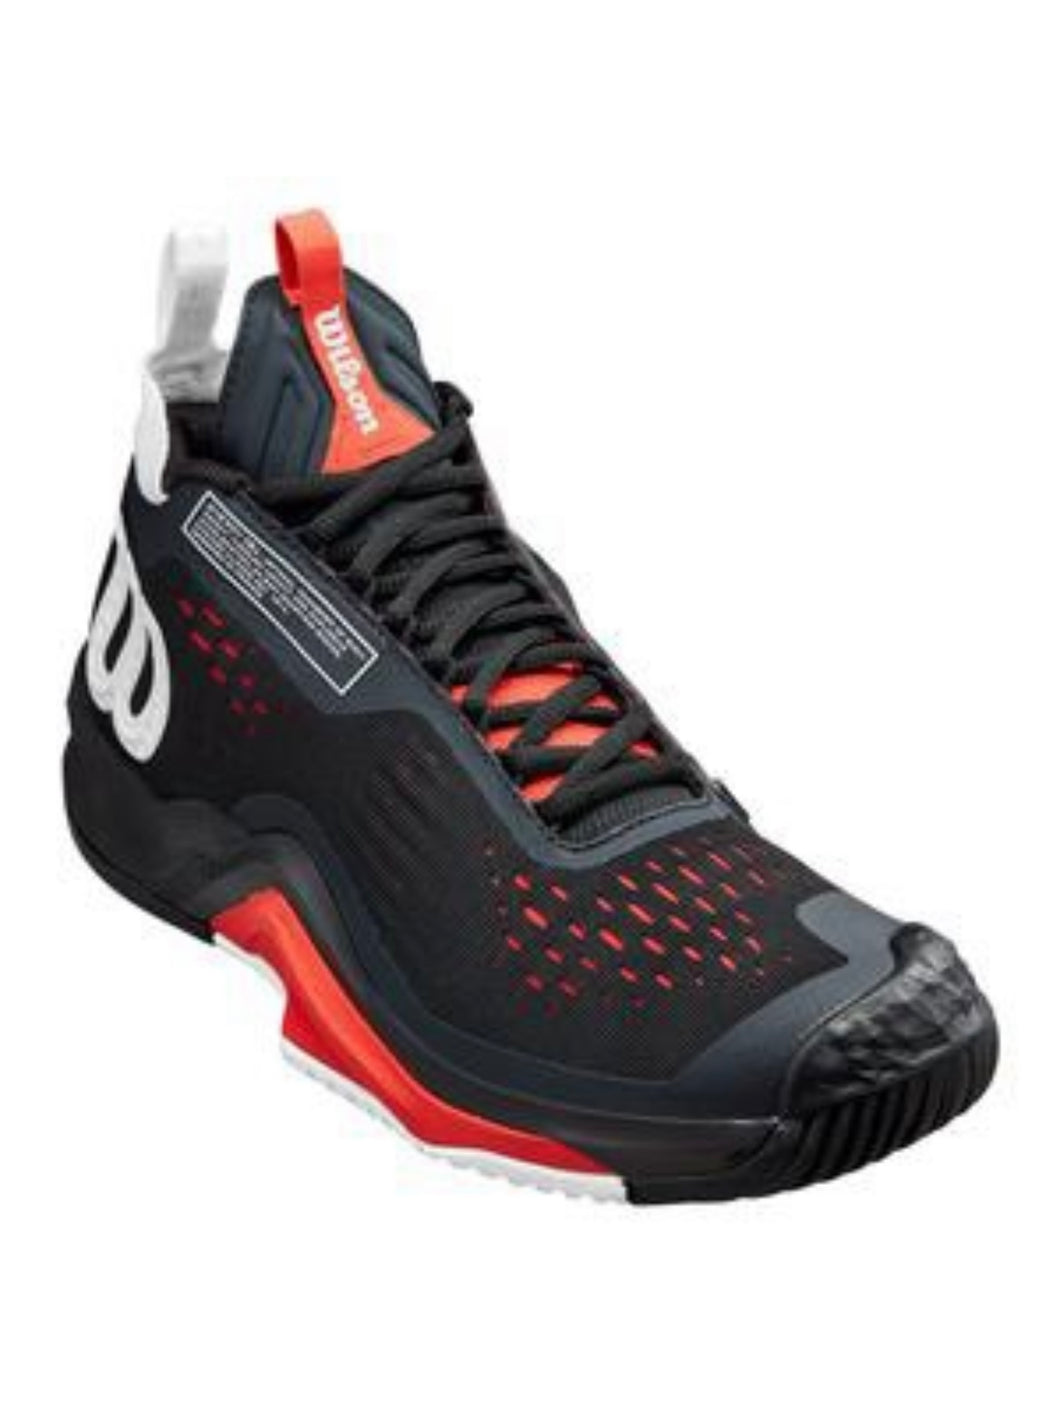 The Wilson Men`s Rush Pro Tour Mid Tennis Shoe shares a lot of the same features as the Rush Pro 4.0, but the mid cut offers extra stability.